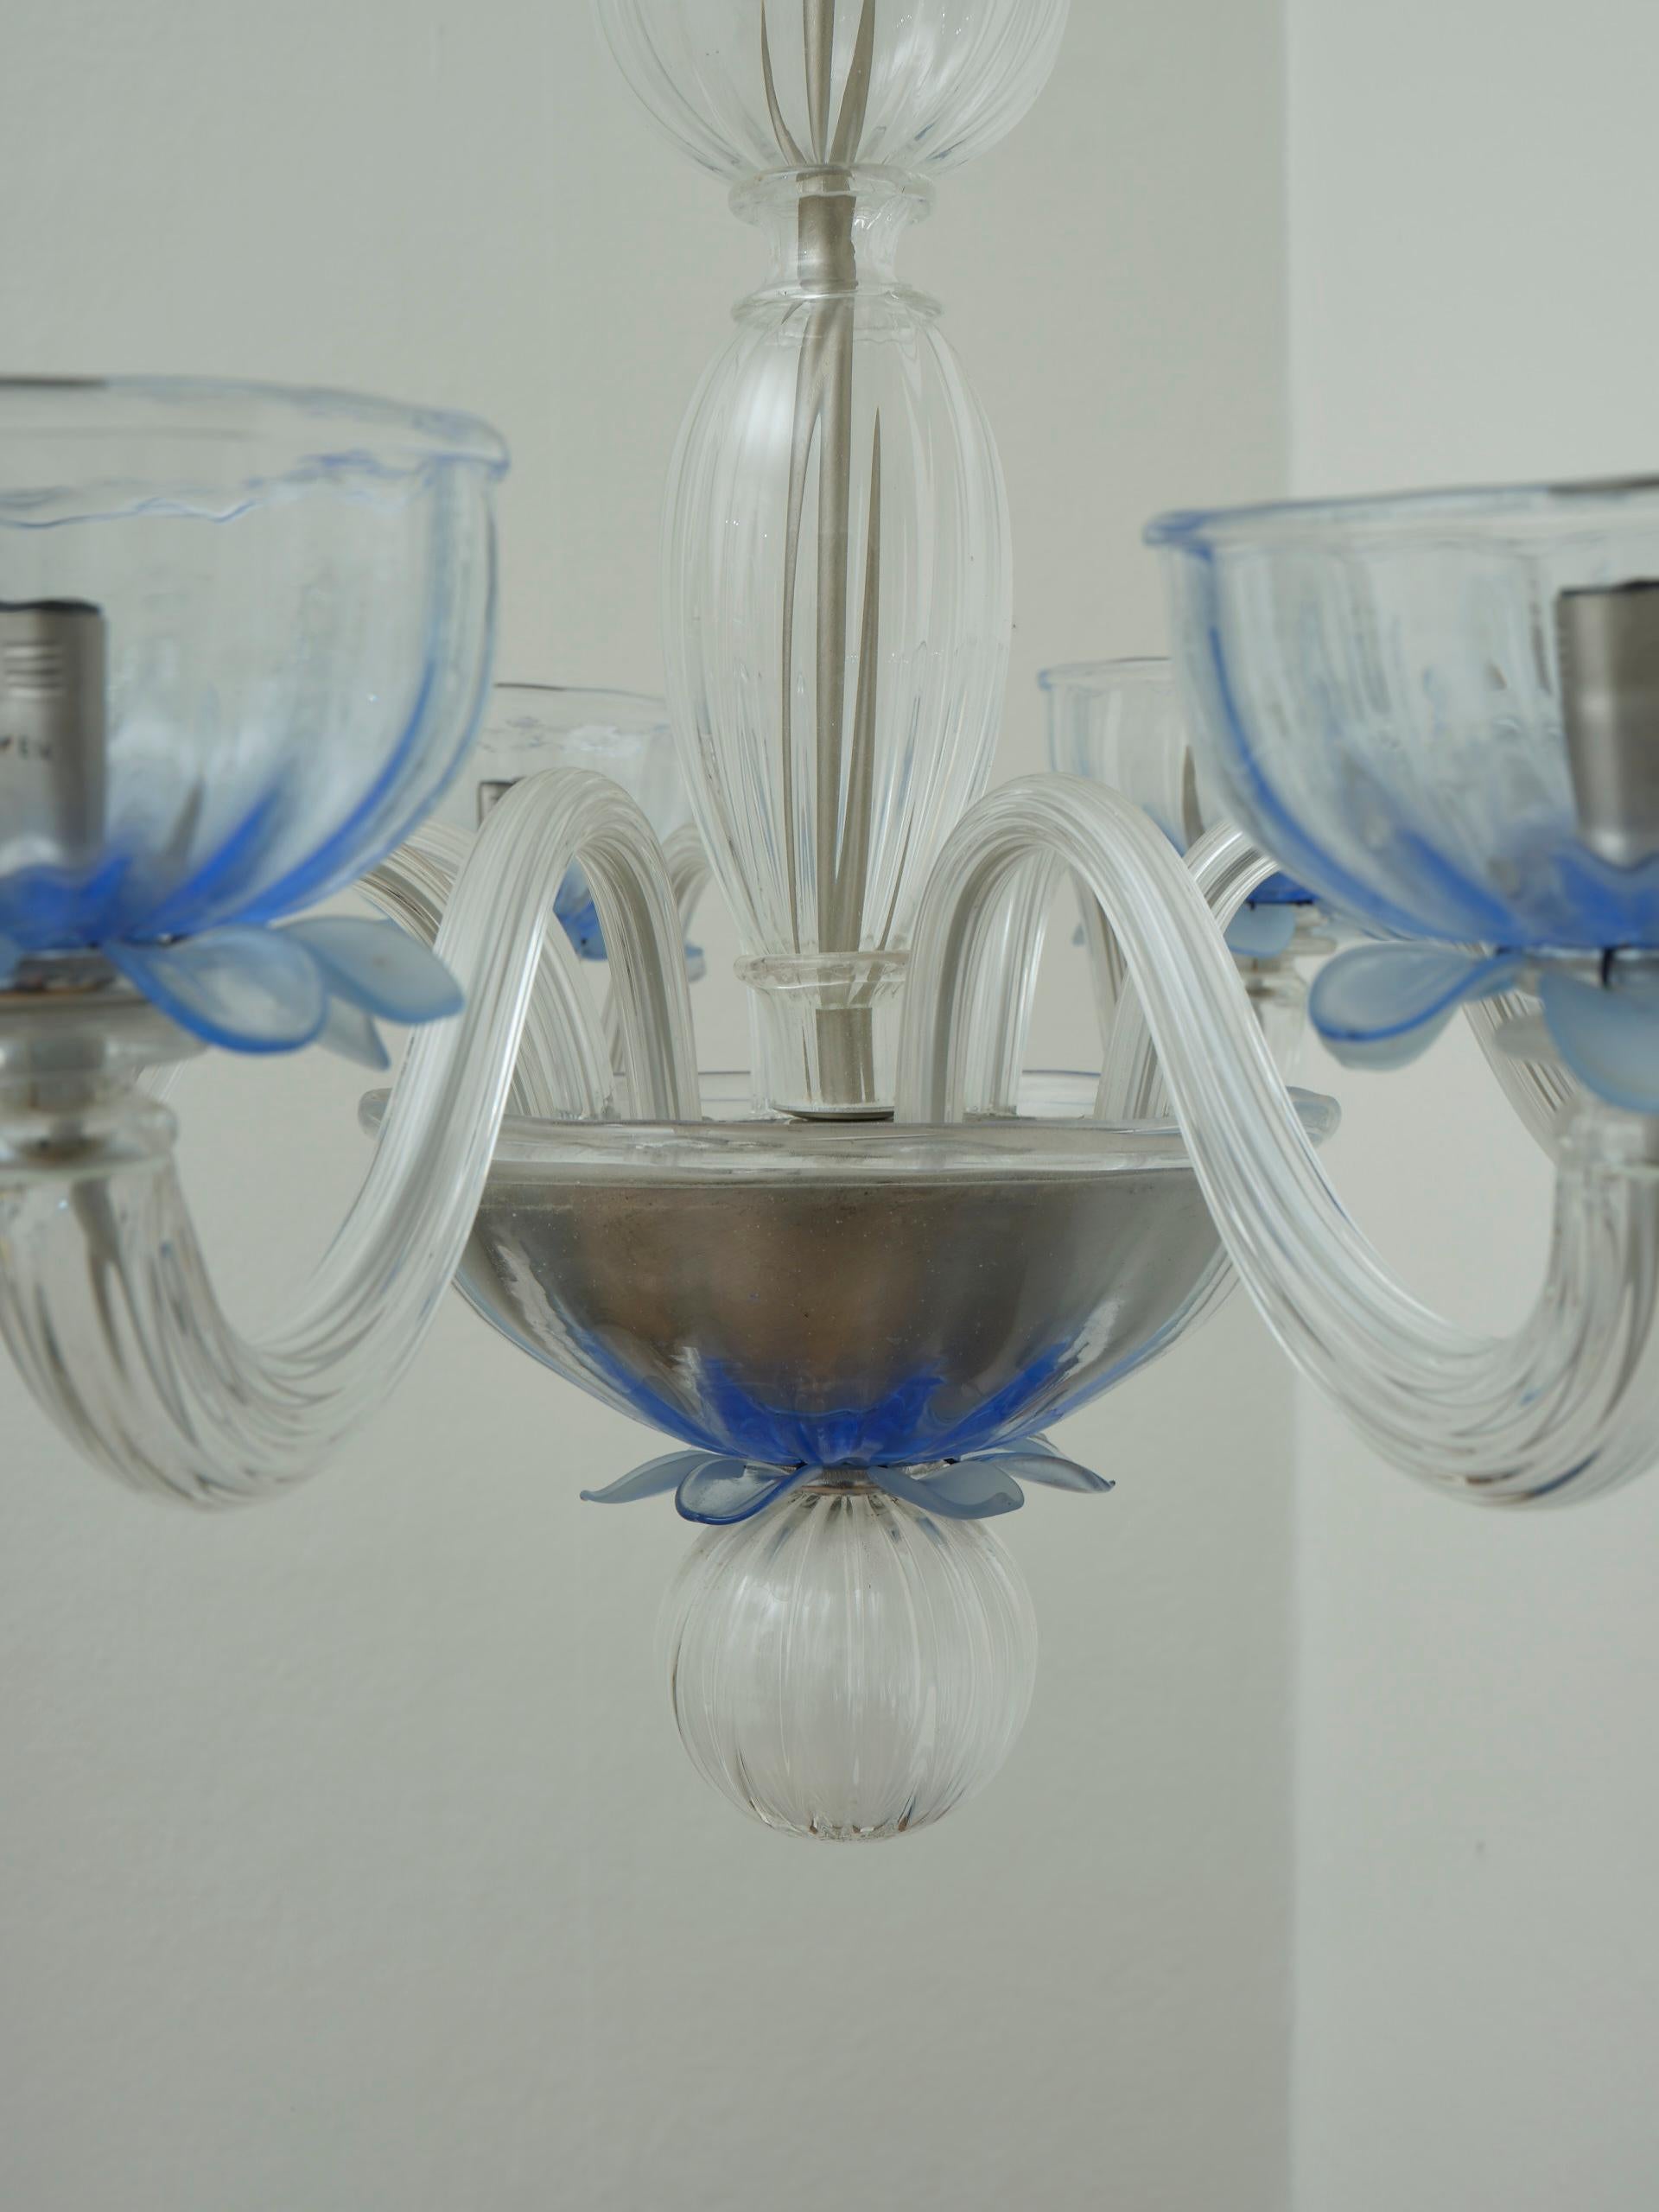 Metal Giant European glass chandelier 8 arms blue details in the style of Murano For Sale